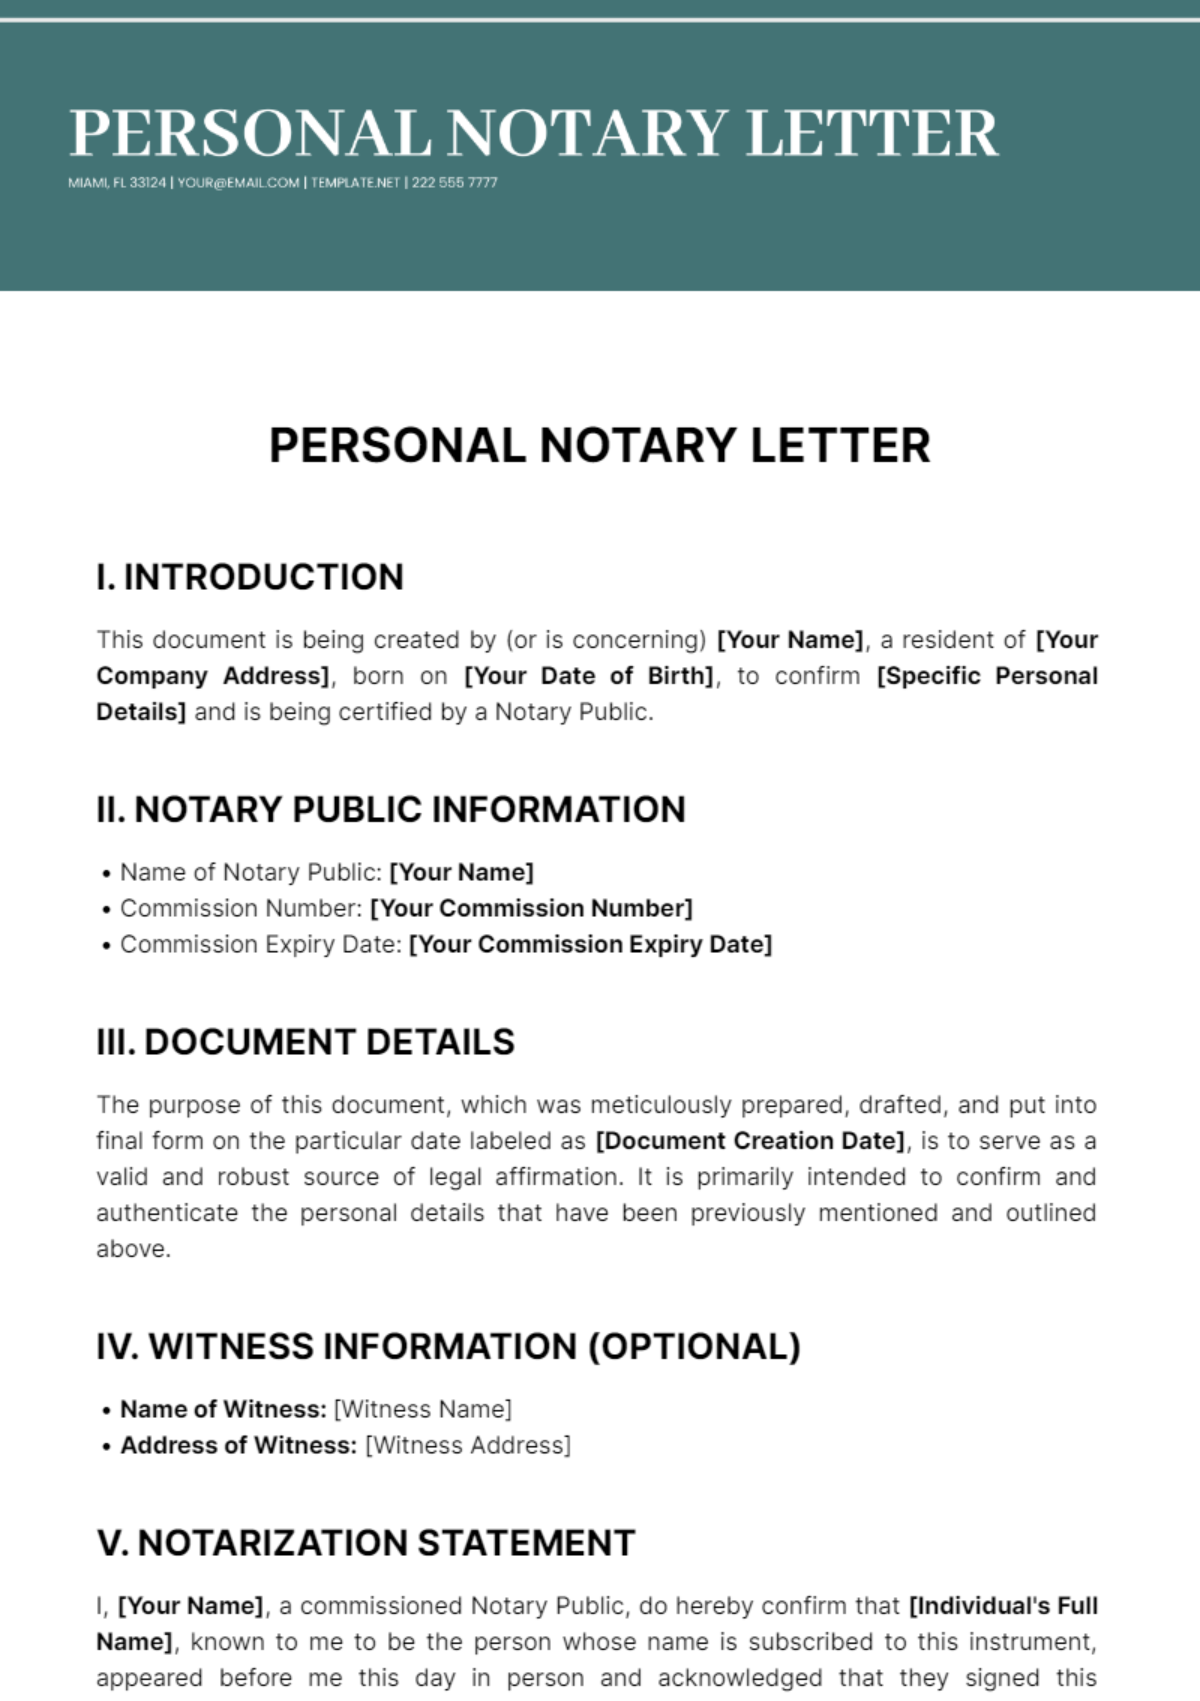 Free Personal Notary Letter Template